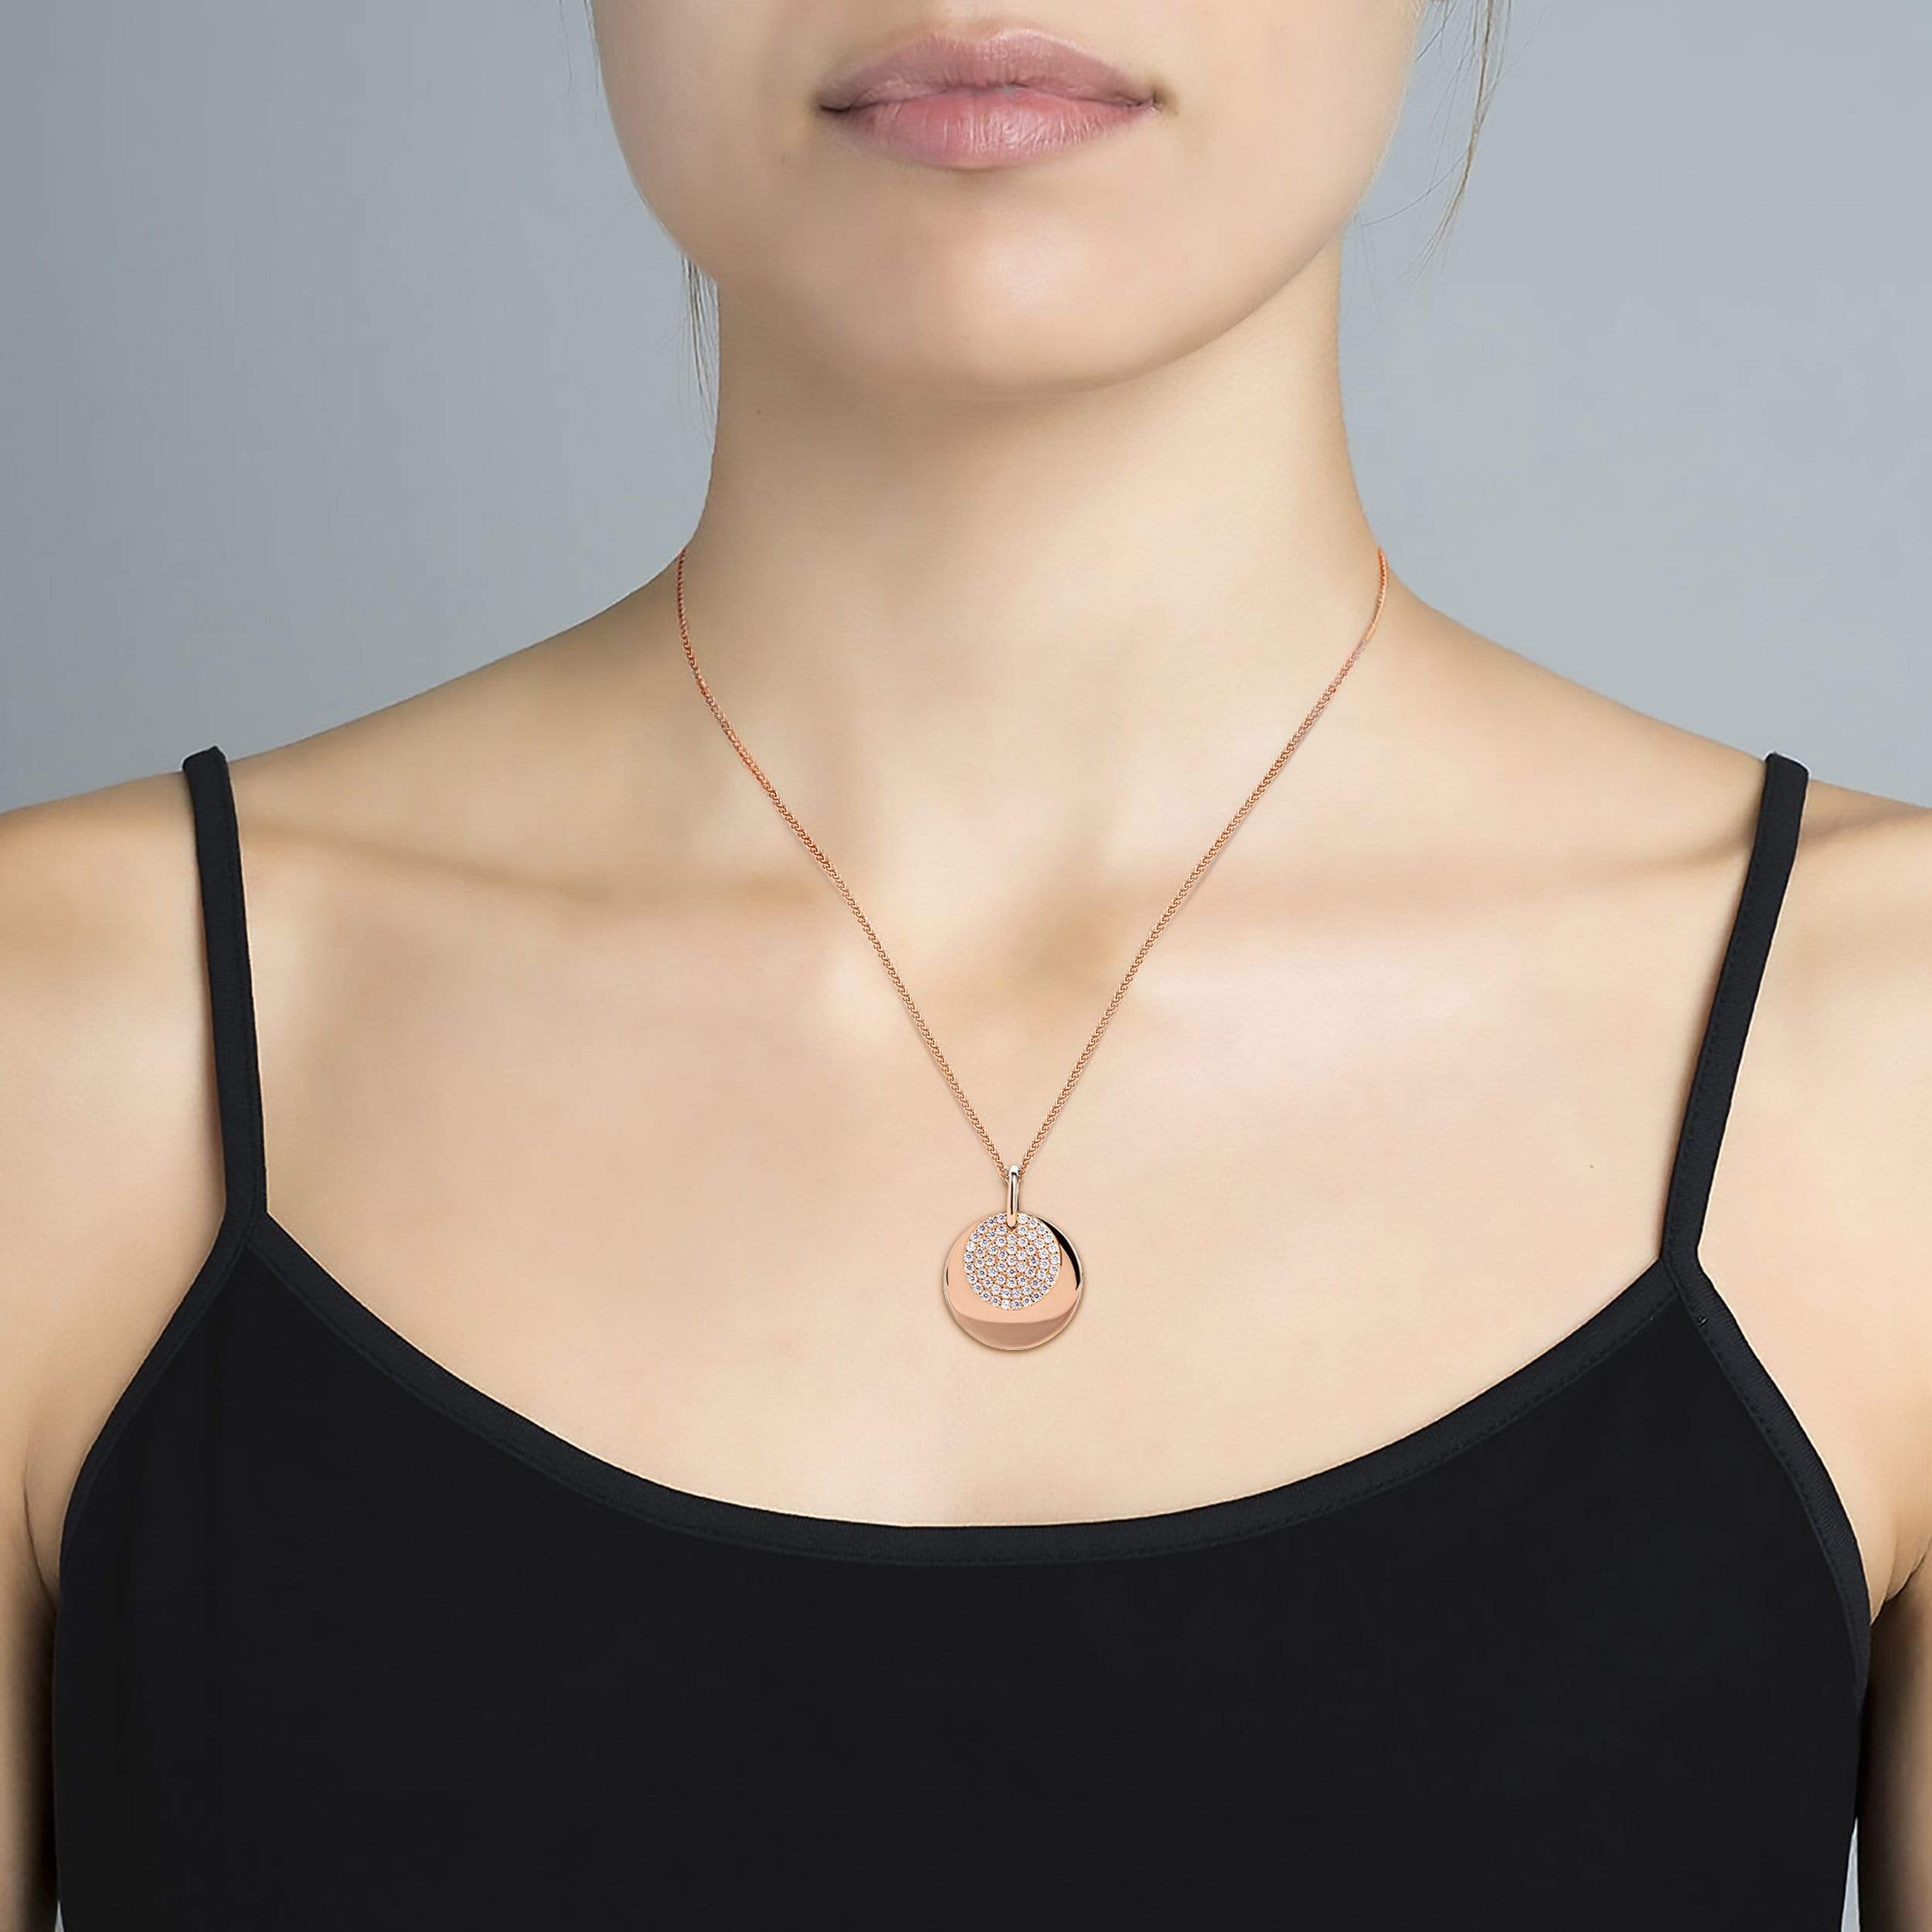 Lynora Jewellery Necklace 18" adj / Rose Gold Plate / Clear Eclipse Pendant Rose Gold Plate